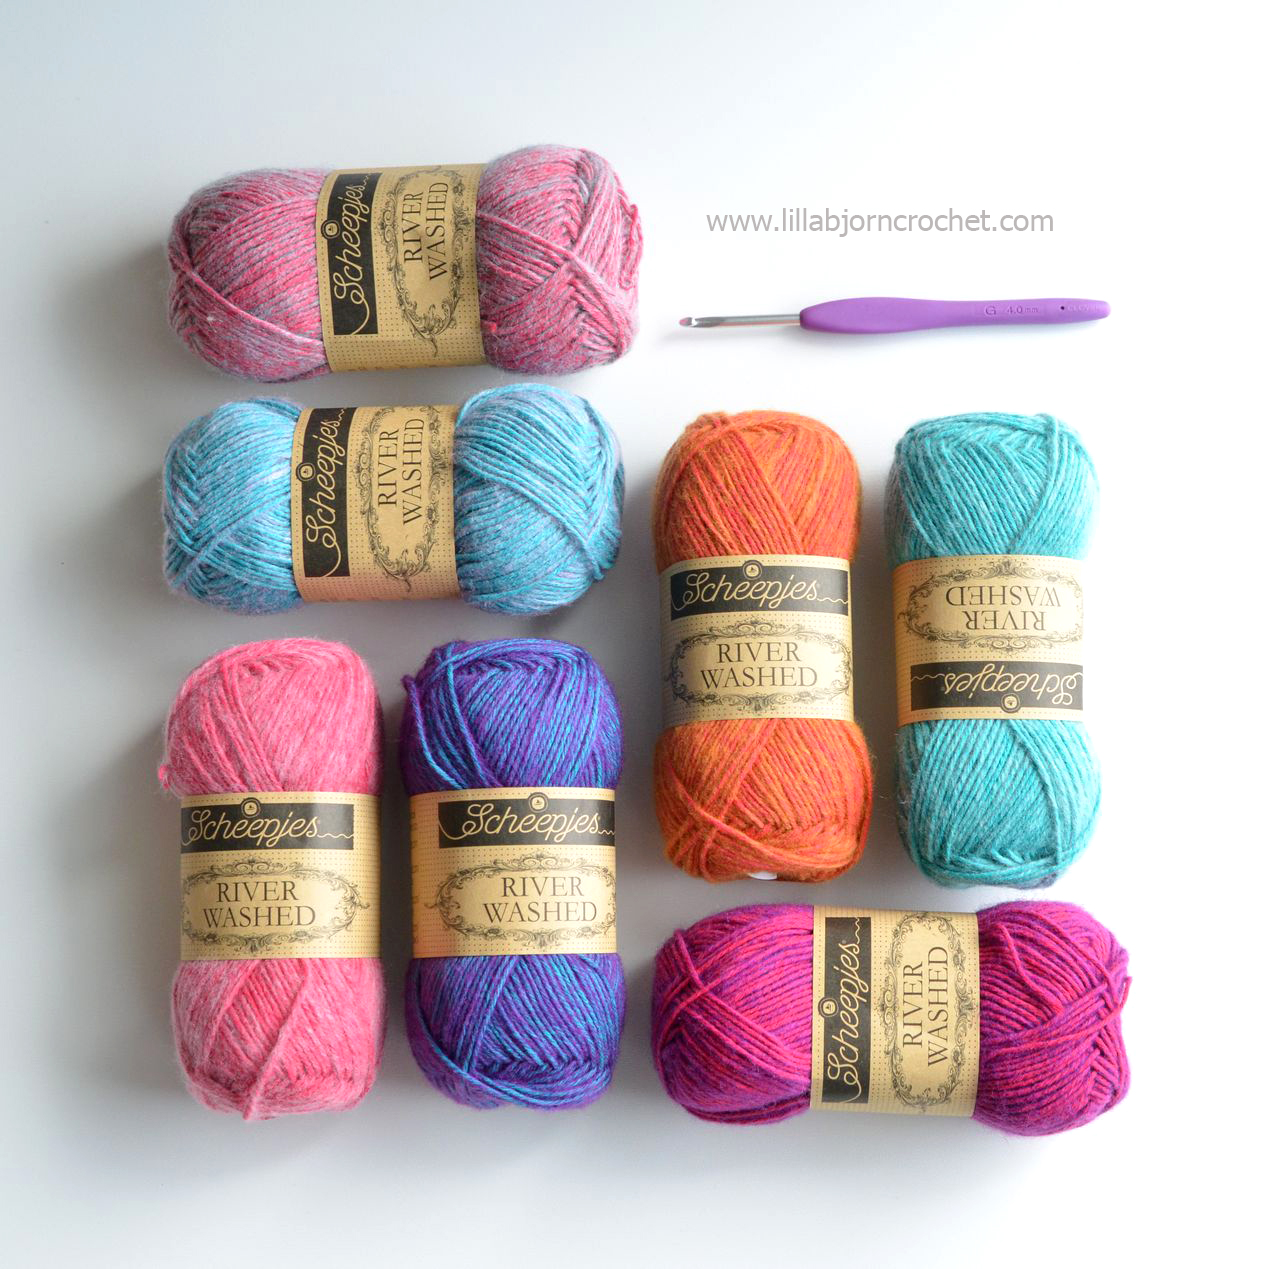 River Washed: new yarn in a famous family | LillaBjörn's Crochet World